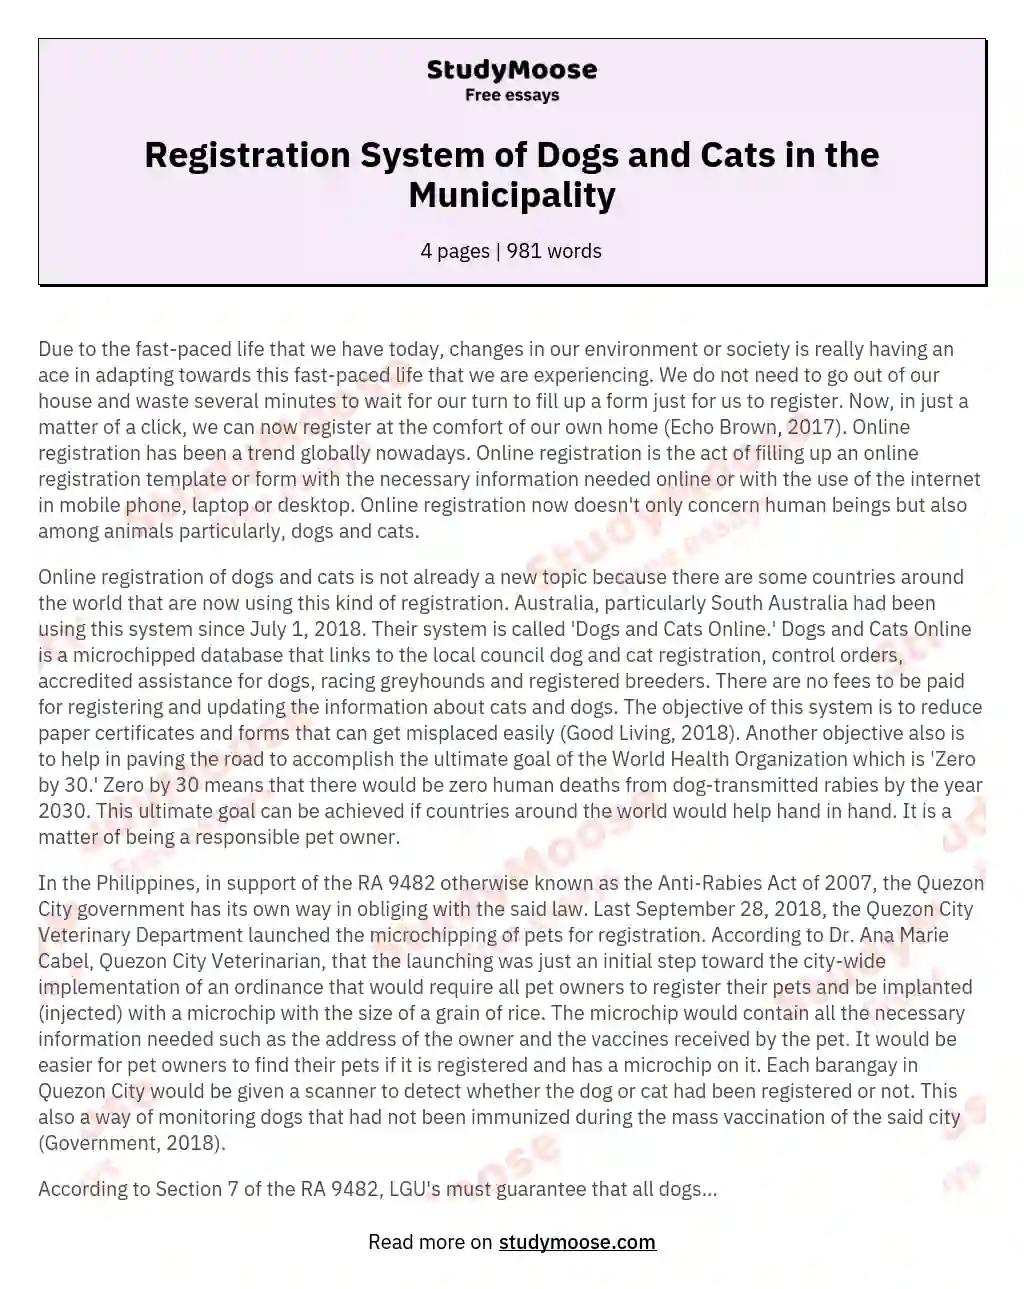 Registration System of Dogs and Cats in the Municipality